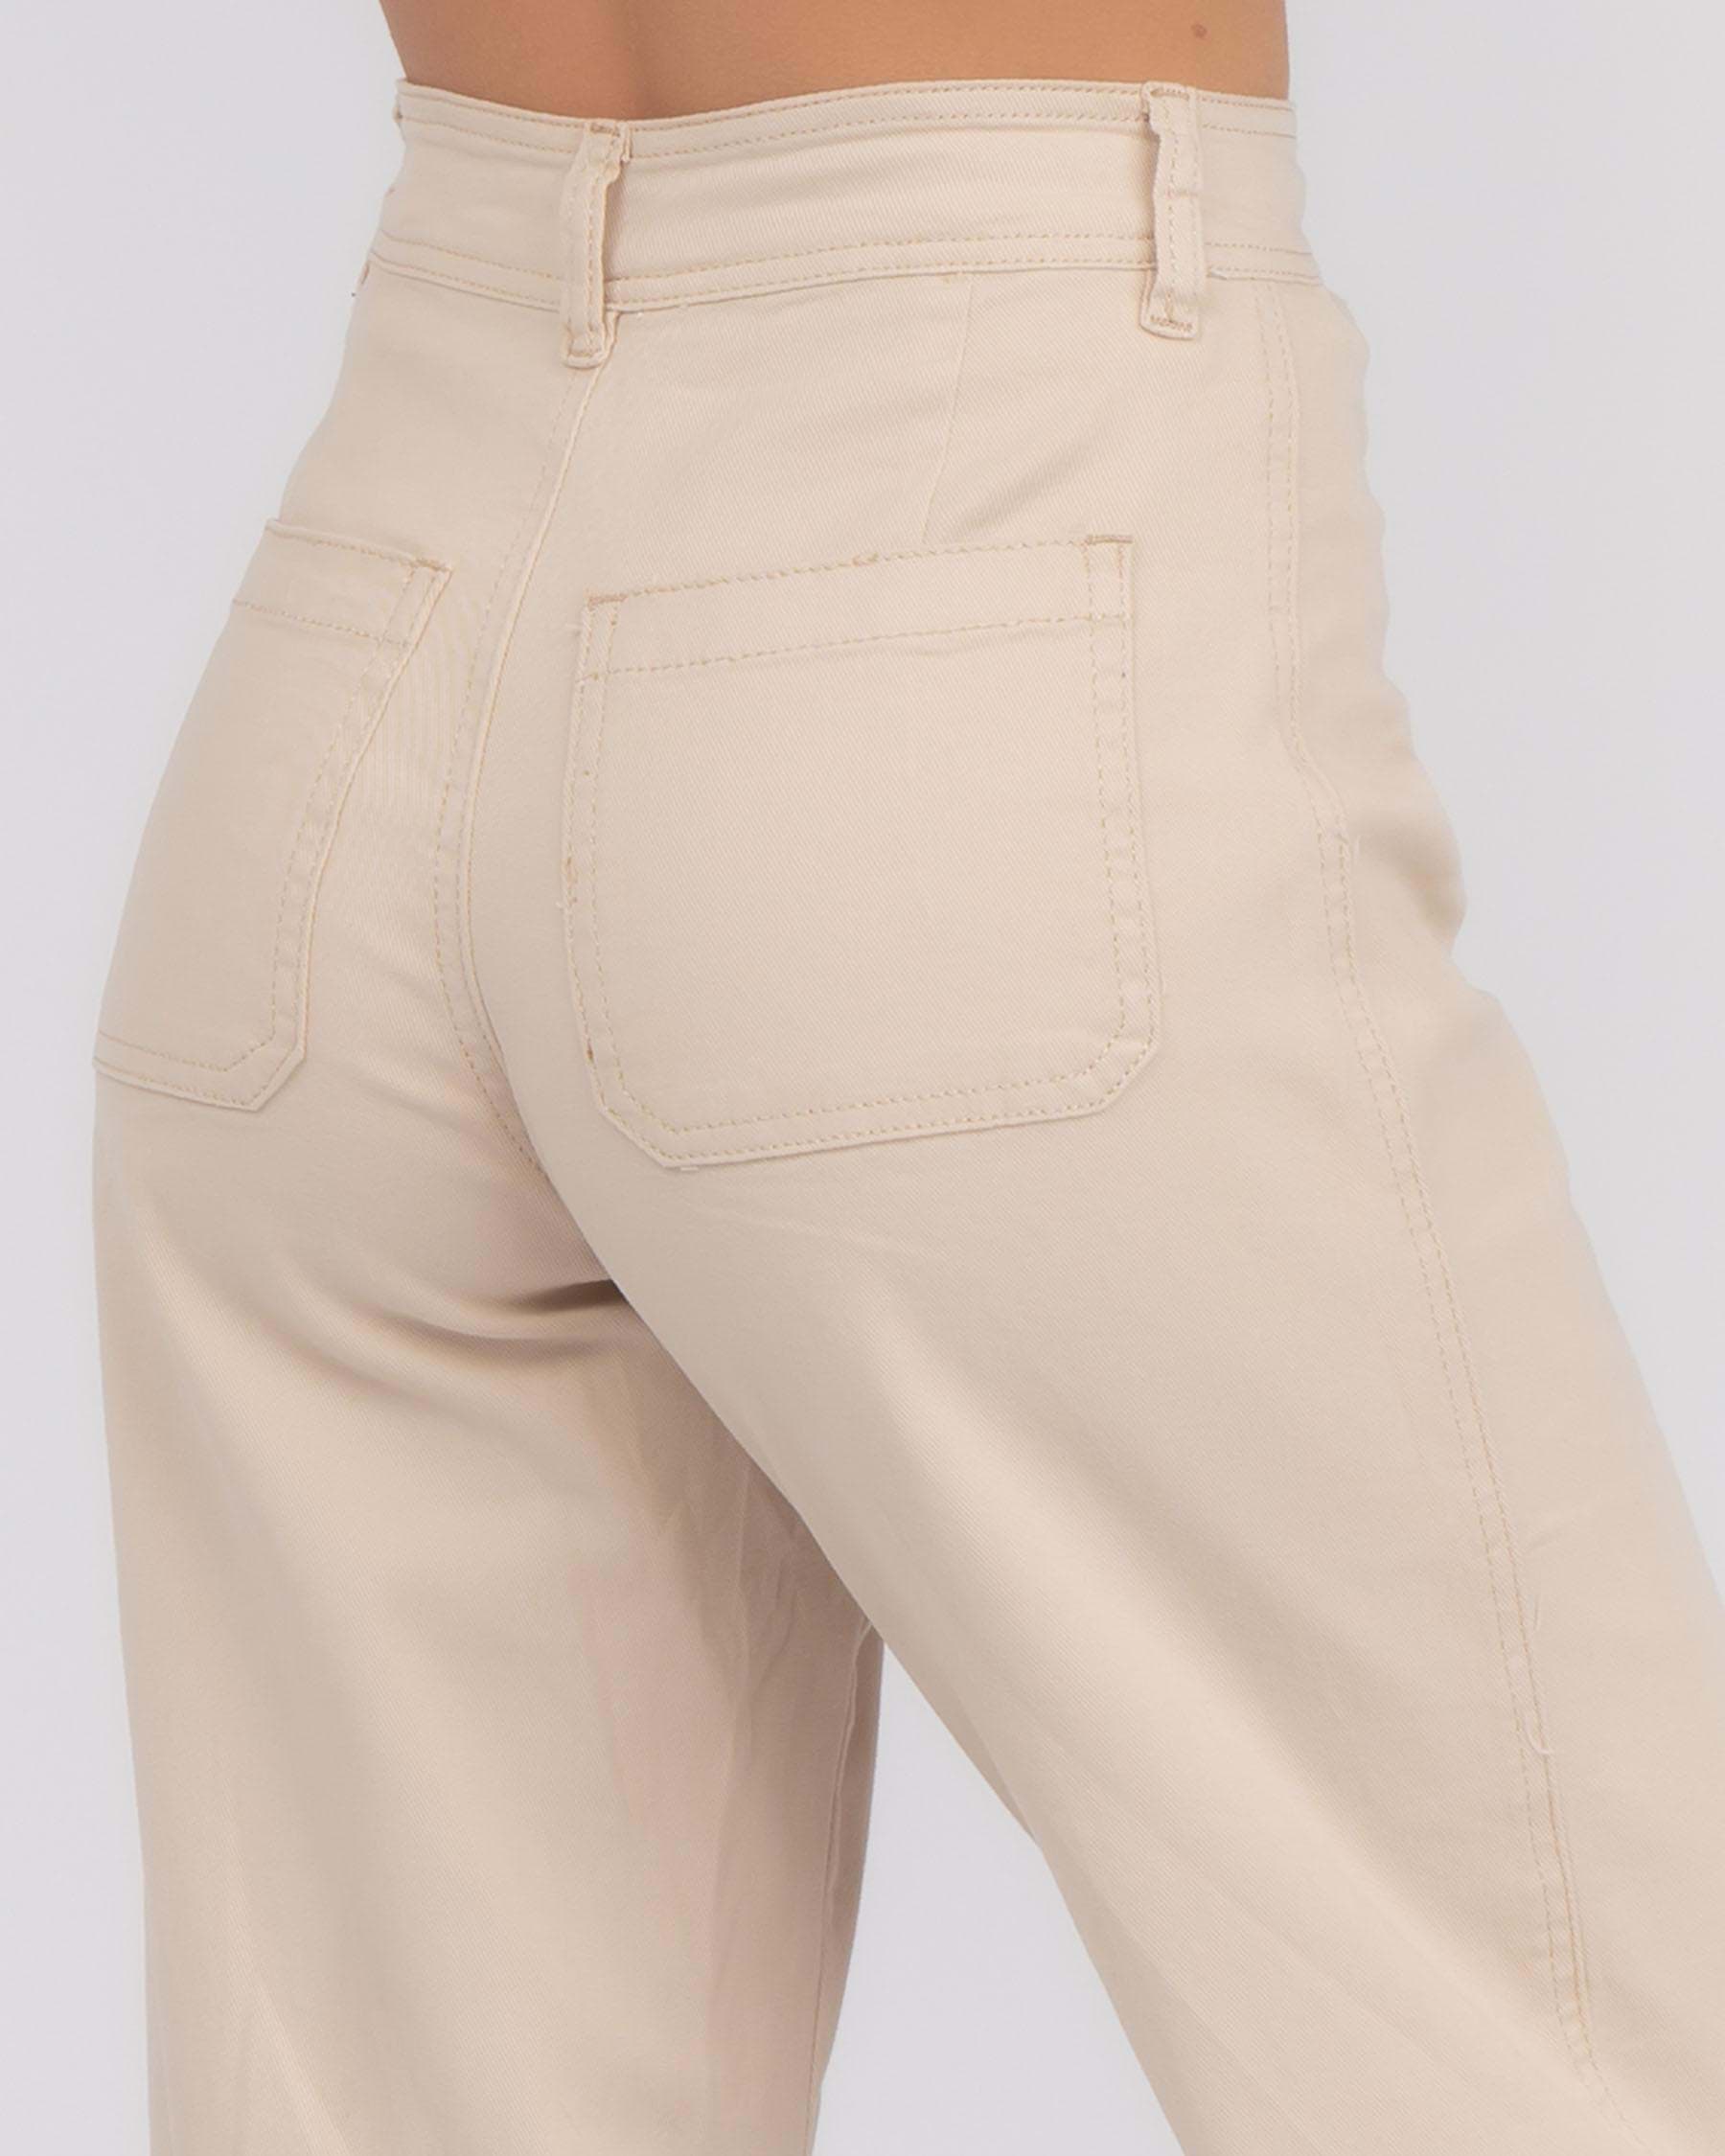 Shop Ava And Ever Atlanta Pants In Sand - Fast Shipping & Easy Returns ...